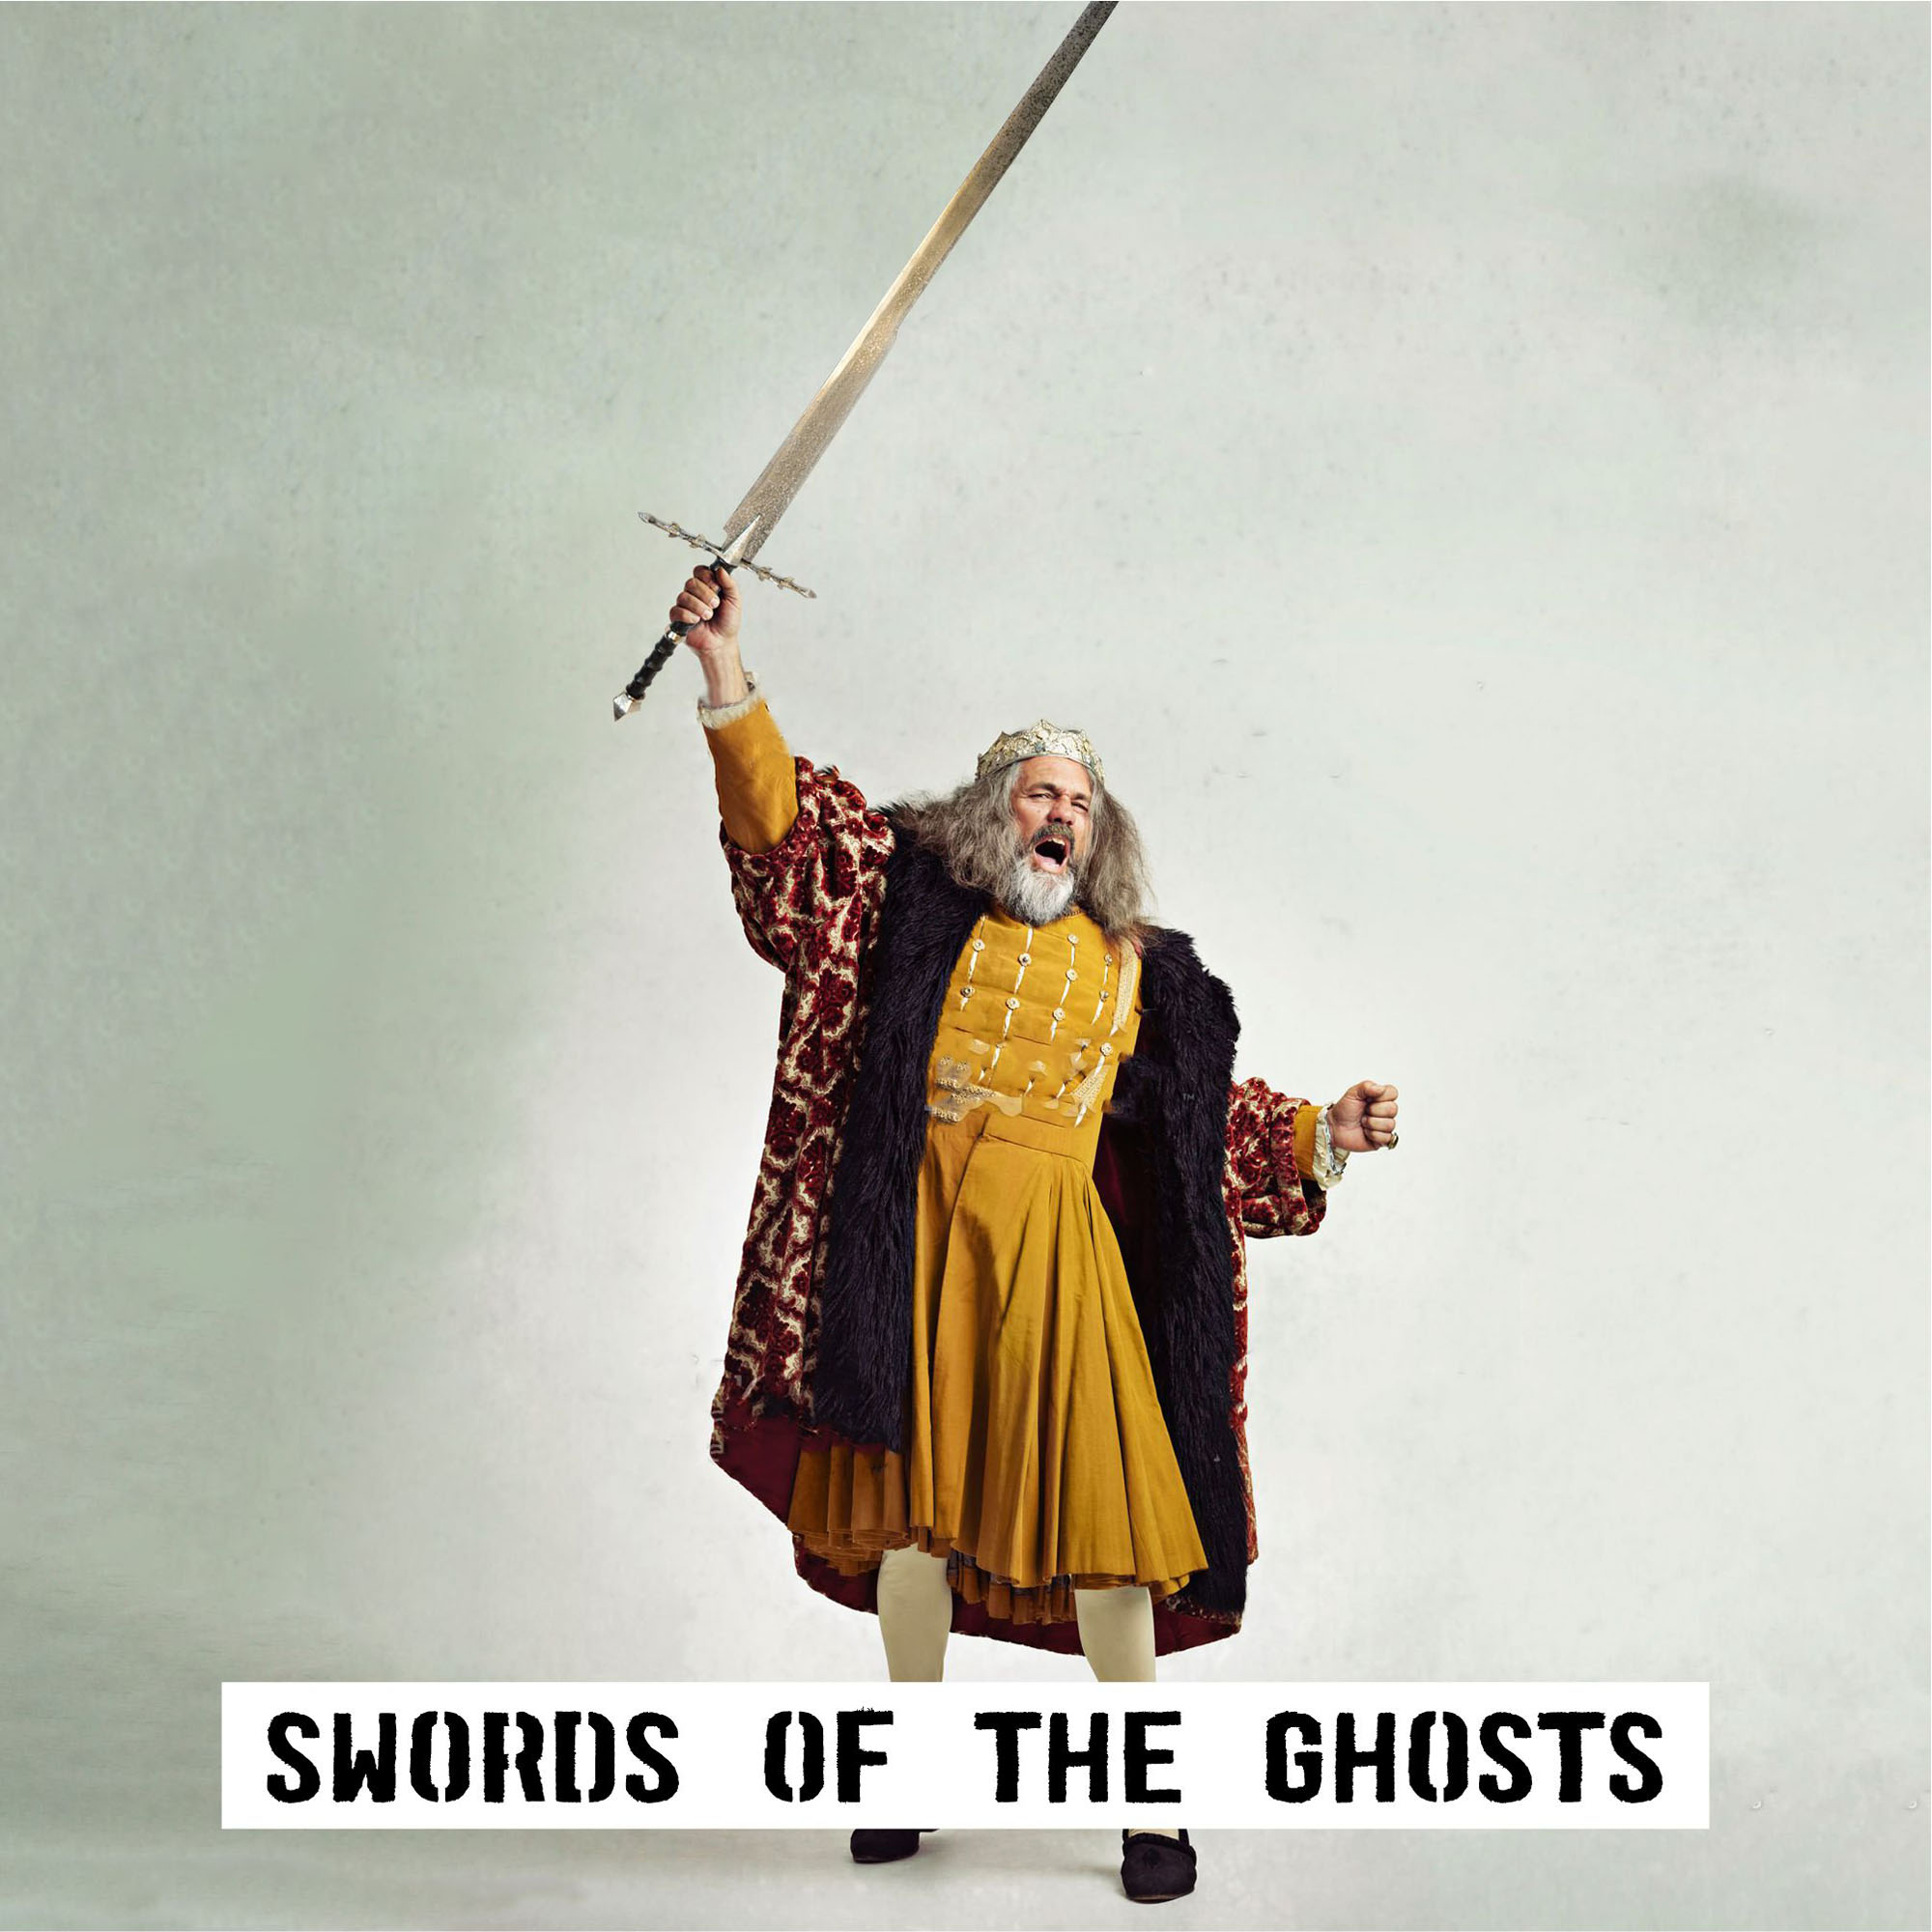 Sword of the ghosts